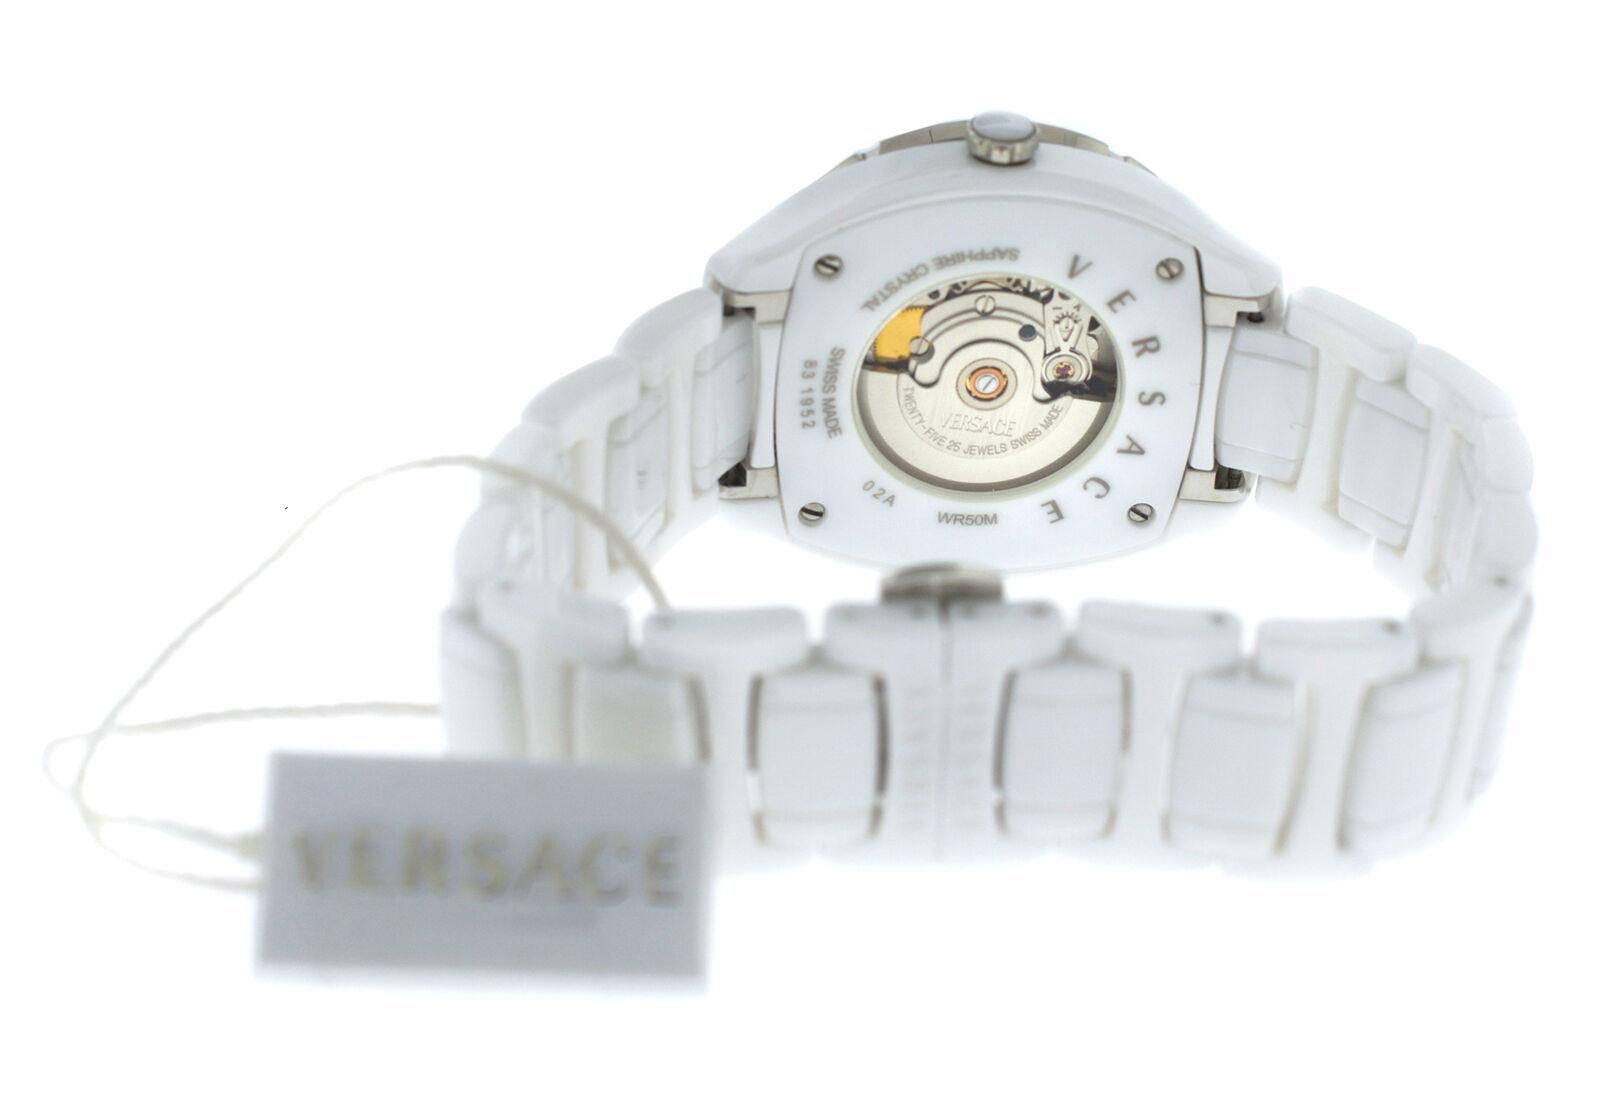 New Versace DV One Ceramic Diamond Automatic Date Watch In Excellent Condition For Sale In New York, NY